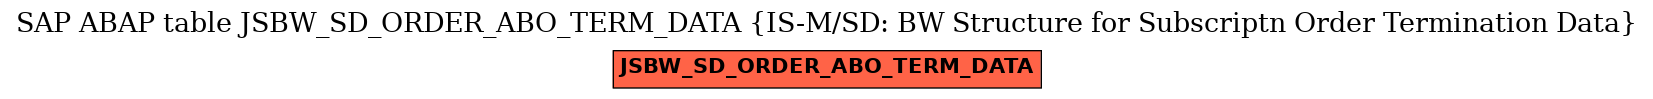 E-R Diagram for table JSBW_SD_ORDER_ABO_TERM_DATA (IS-M/SD: BW Structure for Subscriptn Order Termination Data)